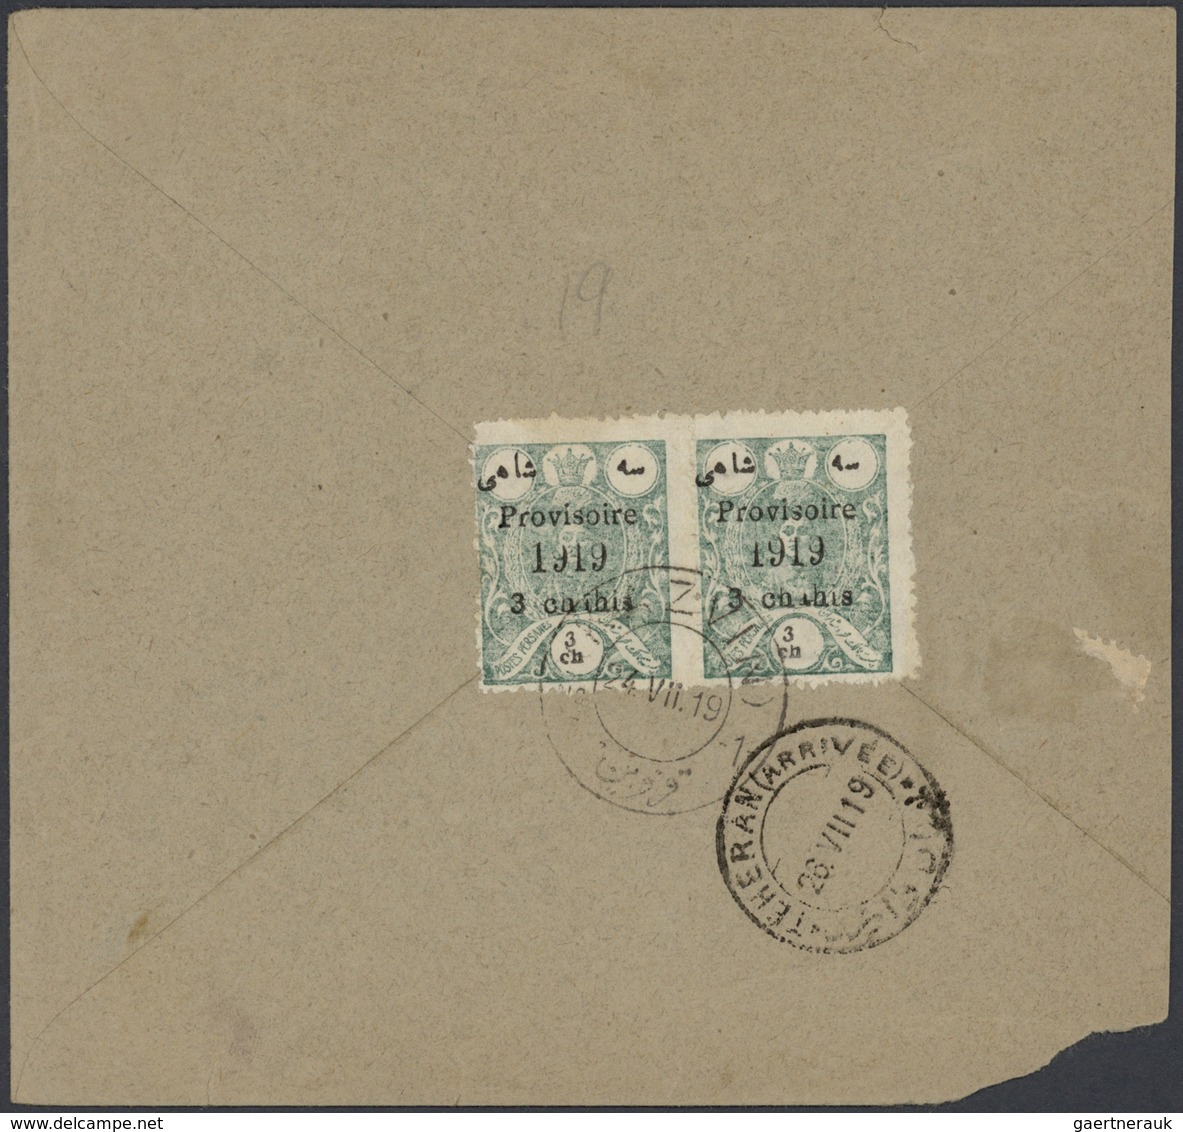 22821 Iran: 1910-30, Collection of 180 covers with many different postal markings and censors, postage due